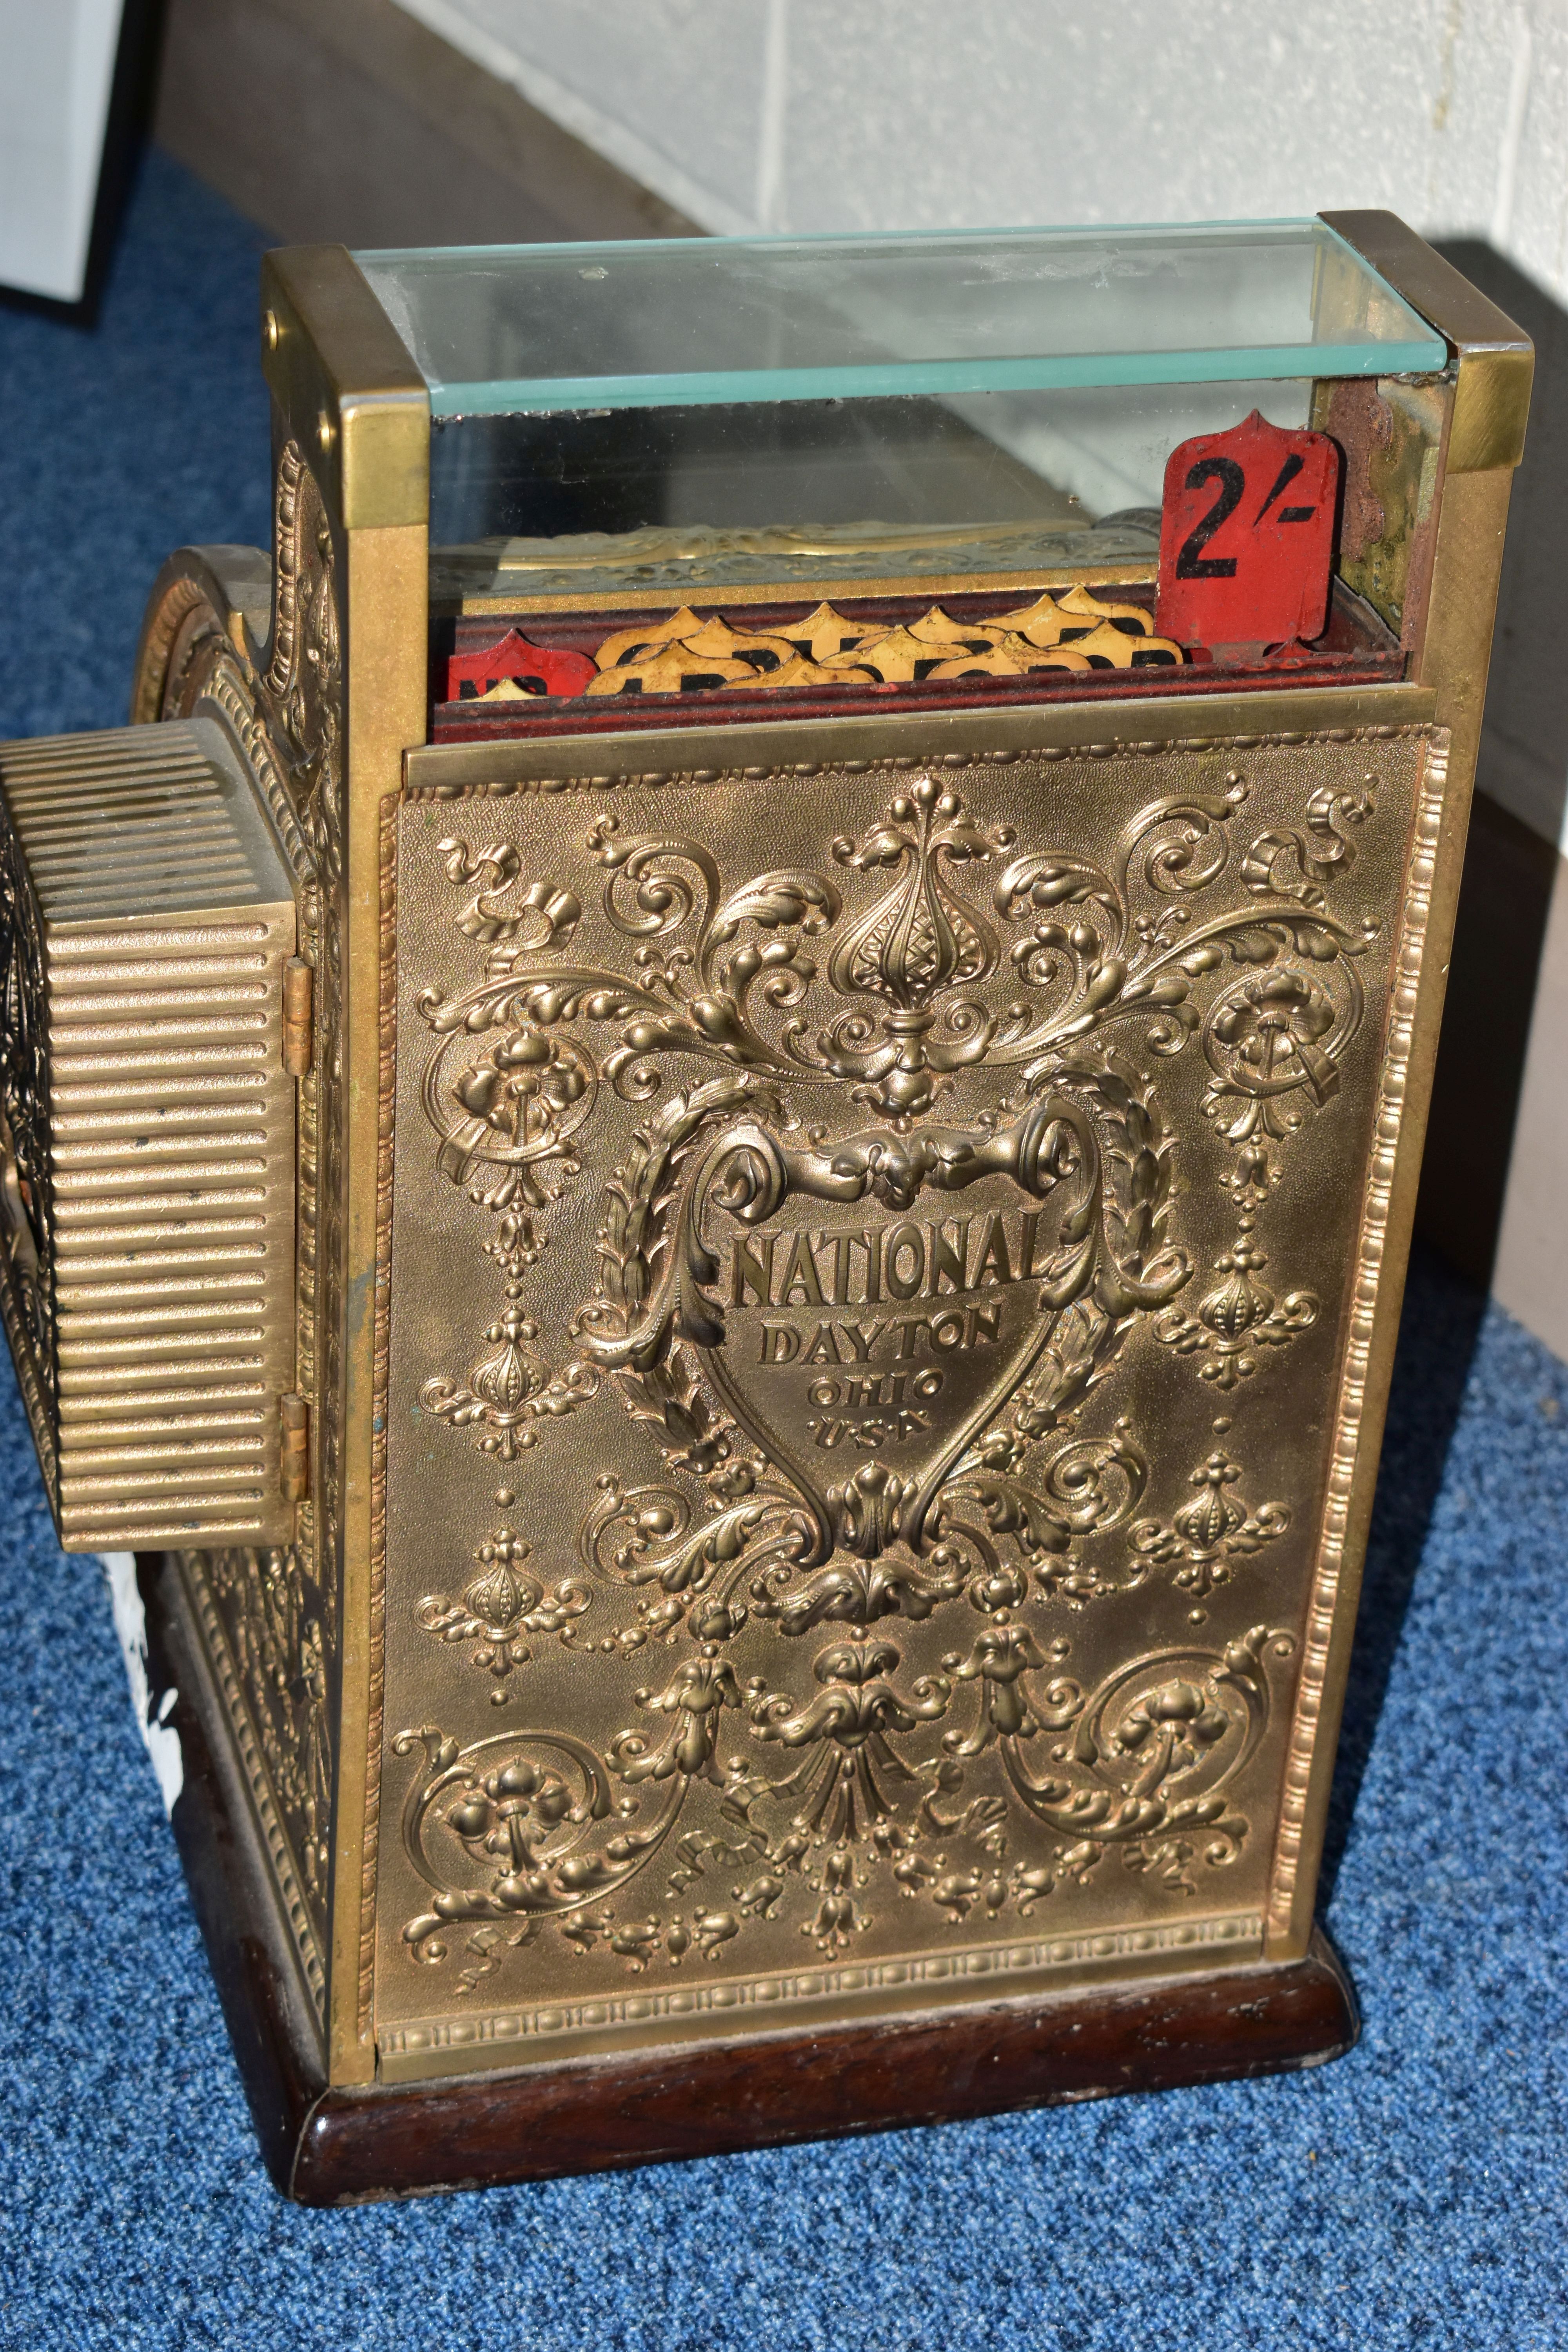 A 20TH CENTURY AMERICAN BRASS CASH REGISTER BY NATIONAL DAYTON OF OHIO, mounted on a wooden - Image 14 of 16